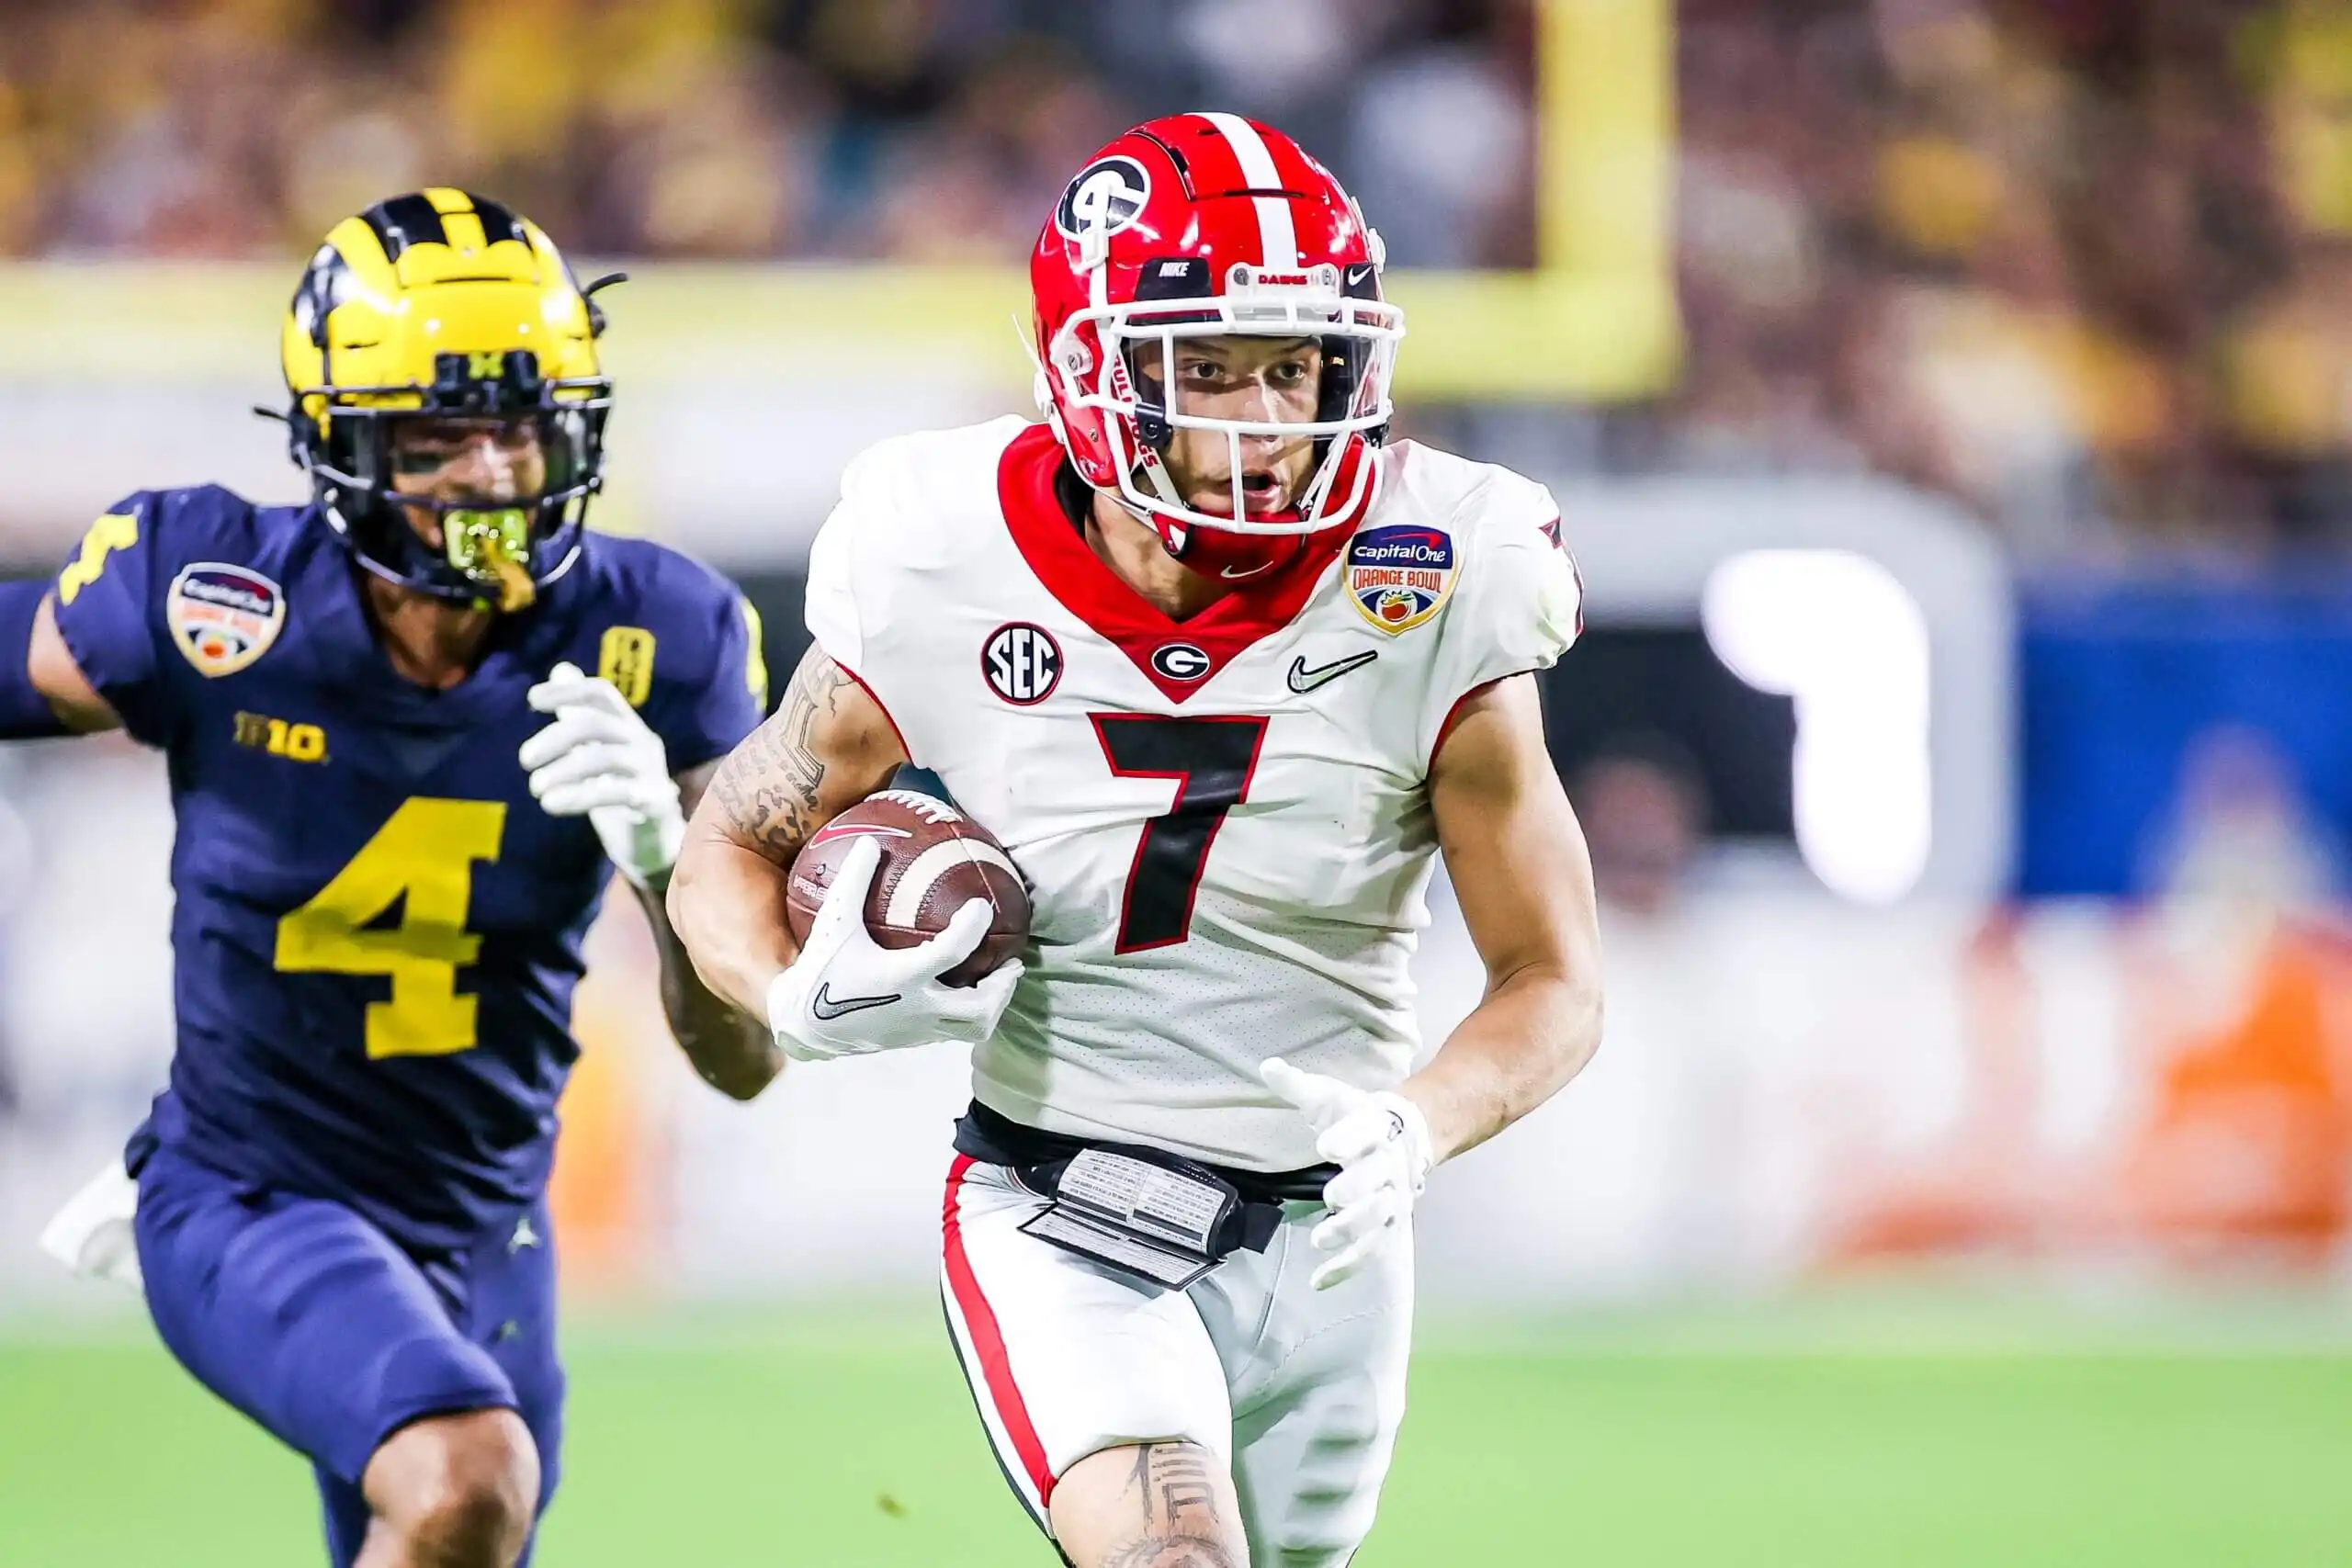 Georgia offense: Jermaine Burton faces challenge to put up big numbers